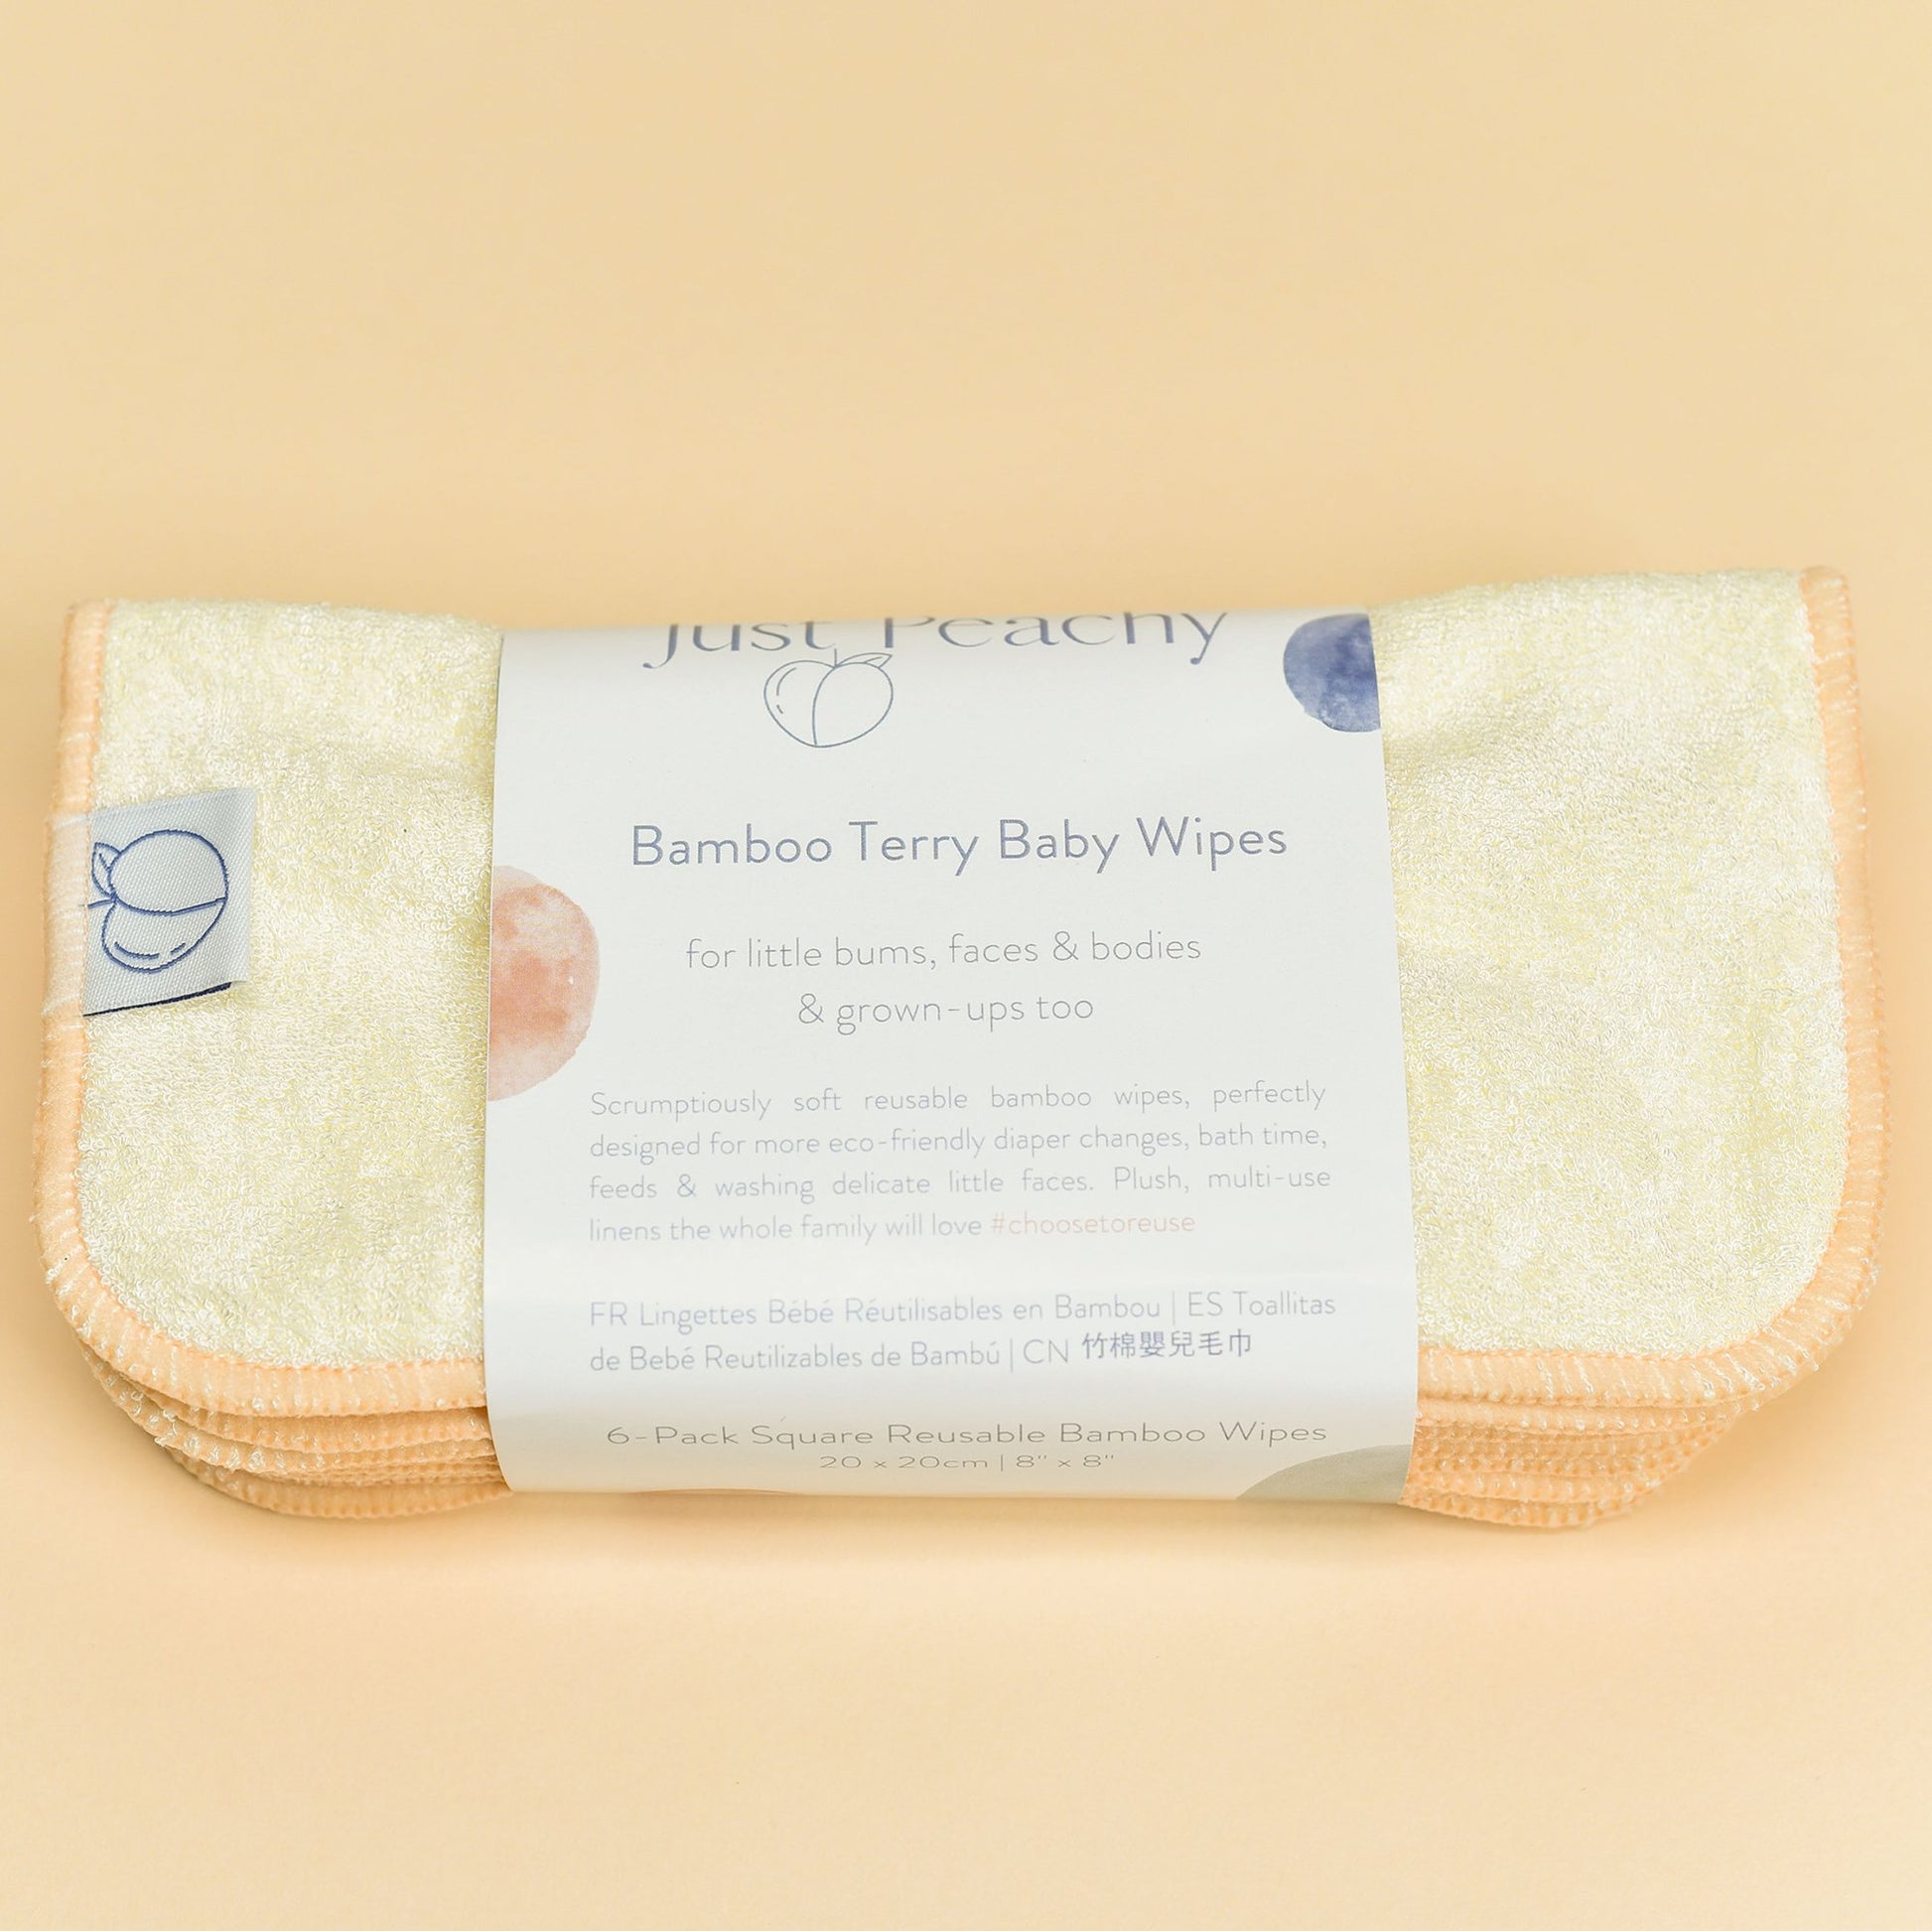 The softest, silkiest cloth wipes your precious little baby has ever used! These are the perfect multi-functional bamboo wipes for delicate little bums, faces and bodies, and great for grown-ups too! Just Peachy bamboo terry wipes are soft and silky smooth, but designed to be practical too - the uses are endless! 